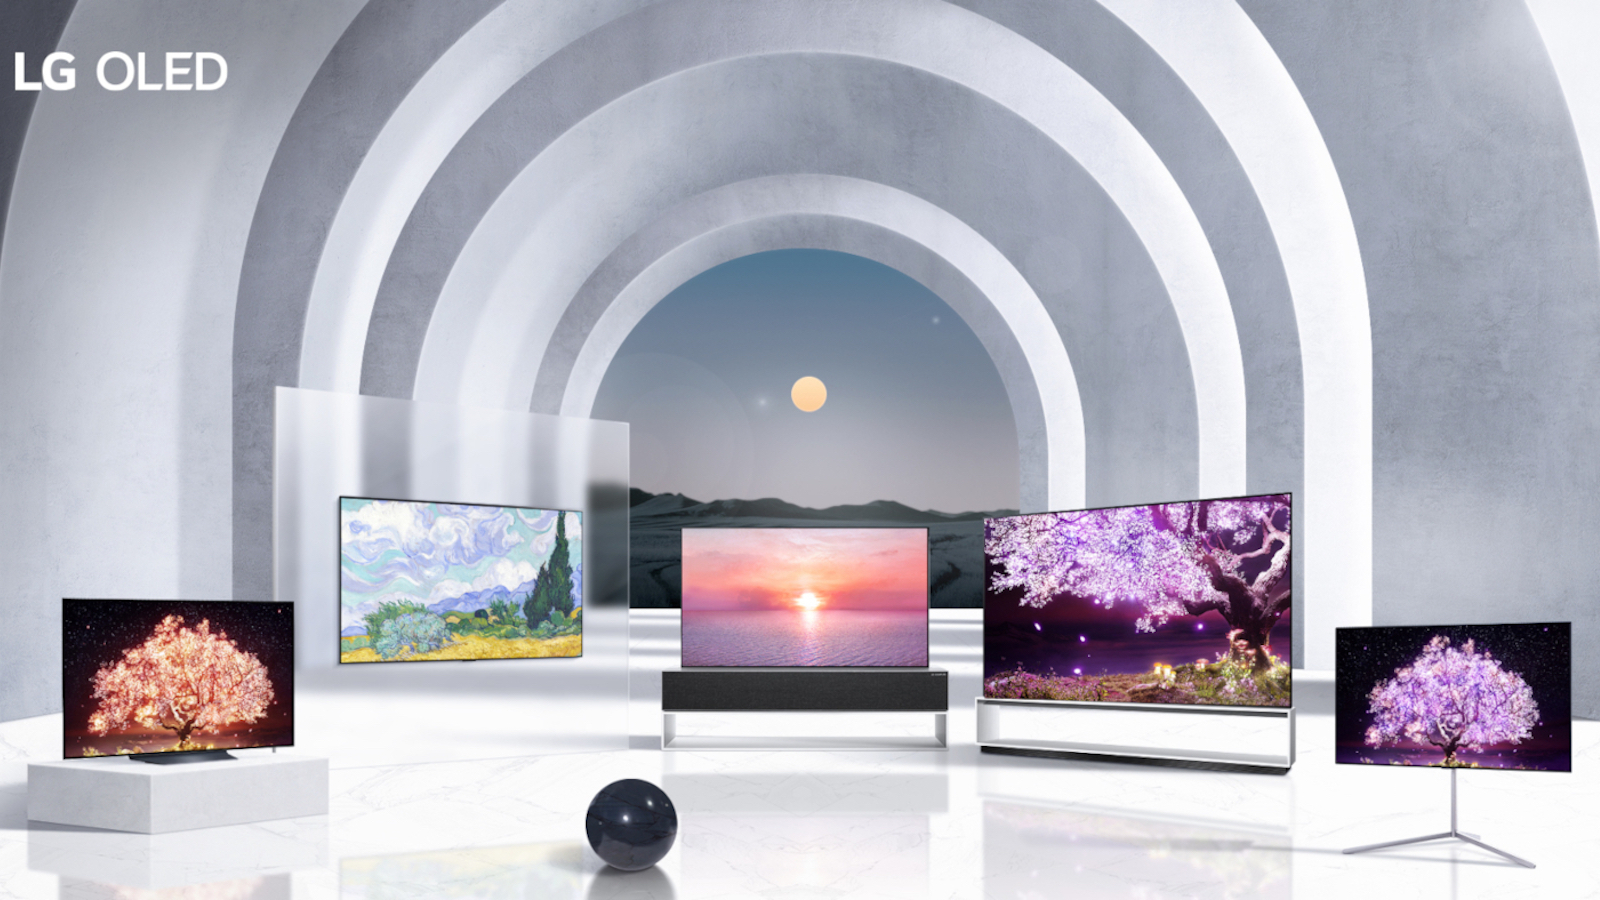 LG 2021 TV lineup: everything you need